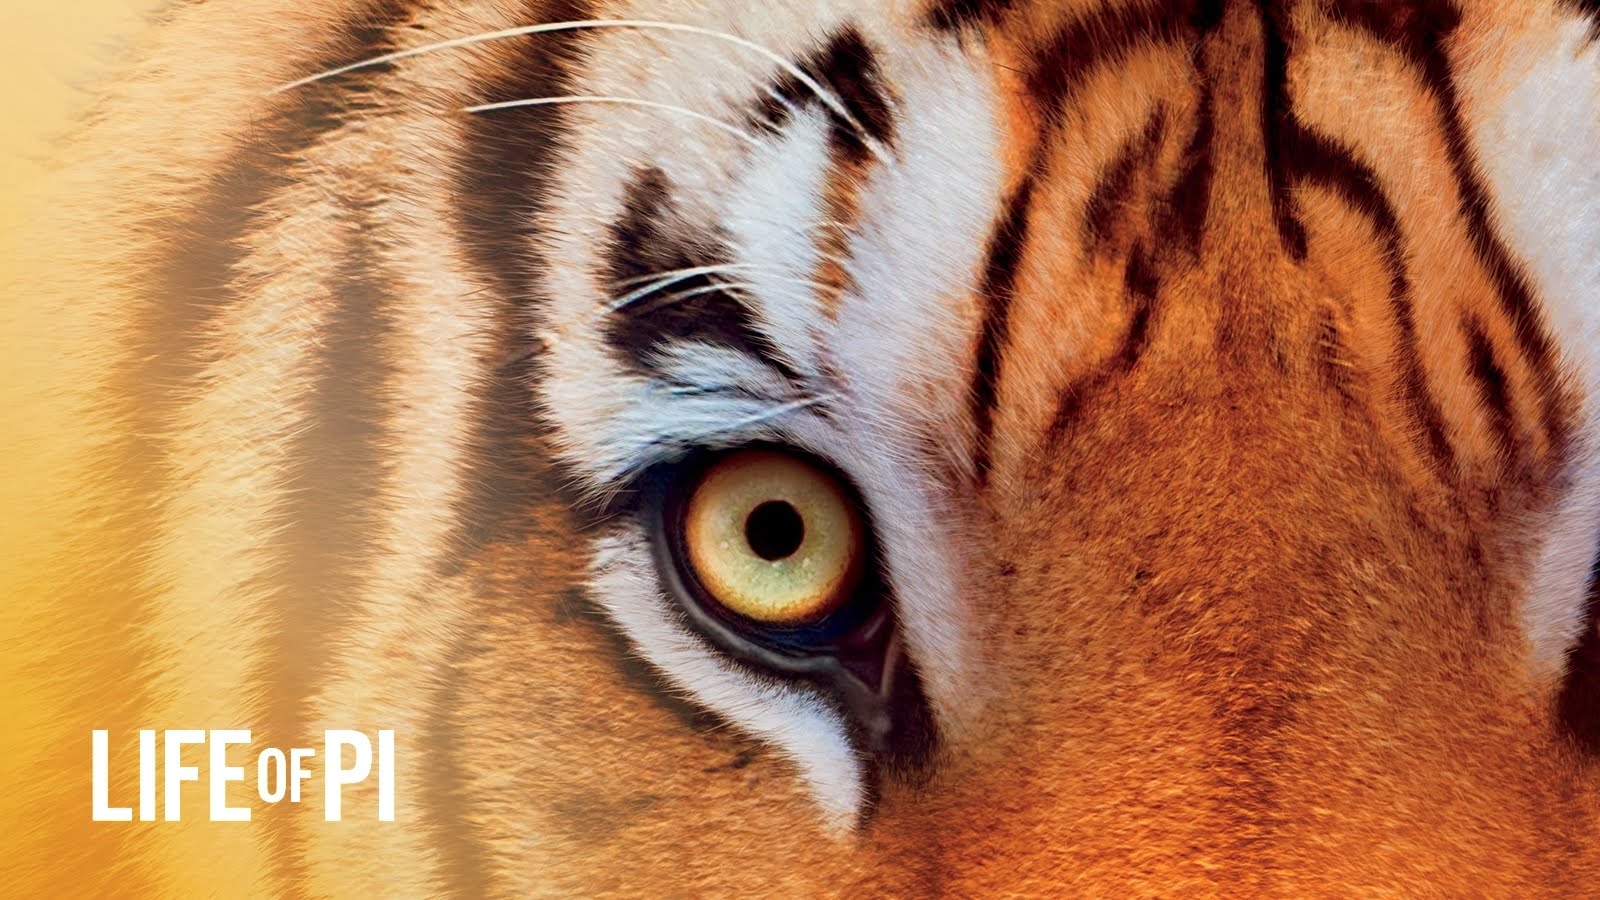 Insights On Life Of Pi Wallpaper Wpc9206330 - Tiger Image For Banner , HD Wallpaper & Backgrounds